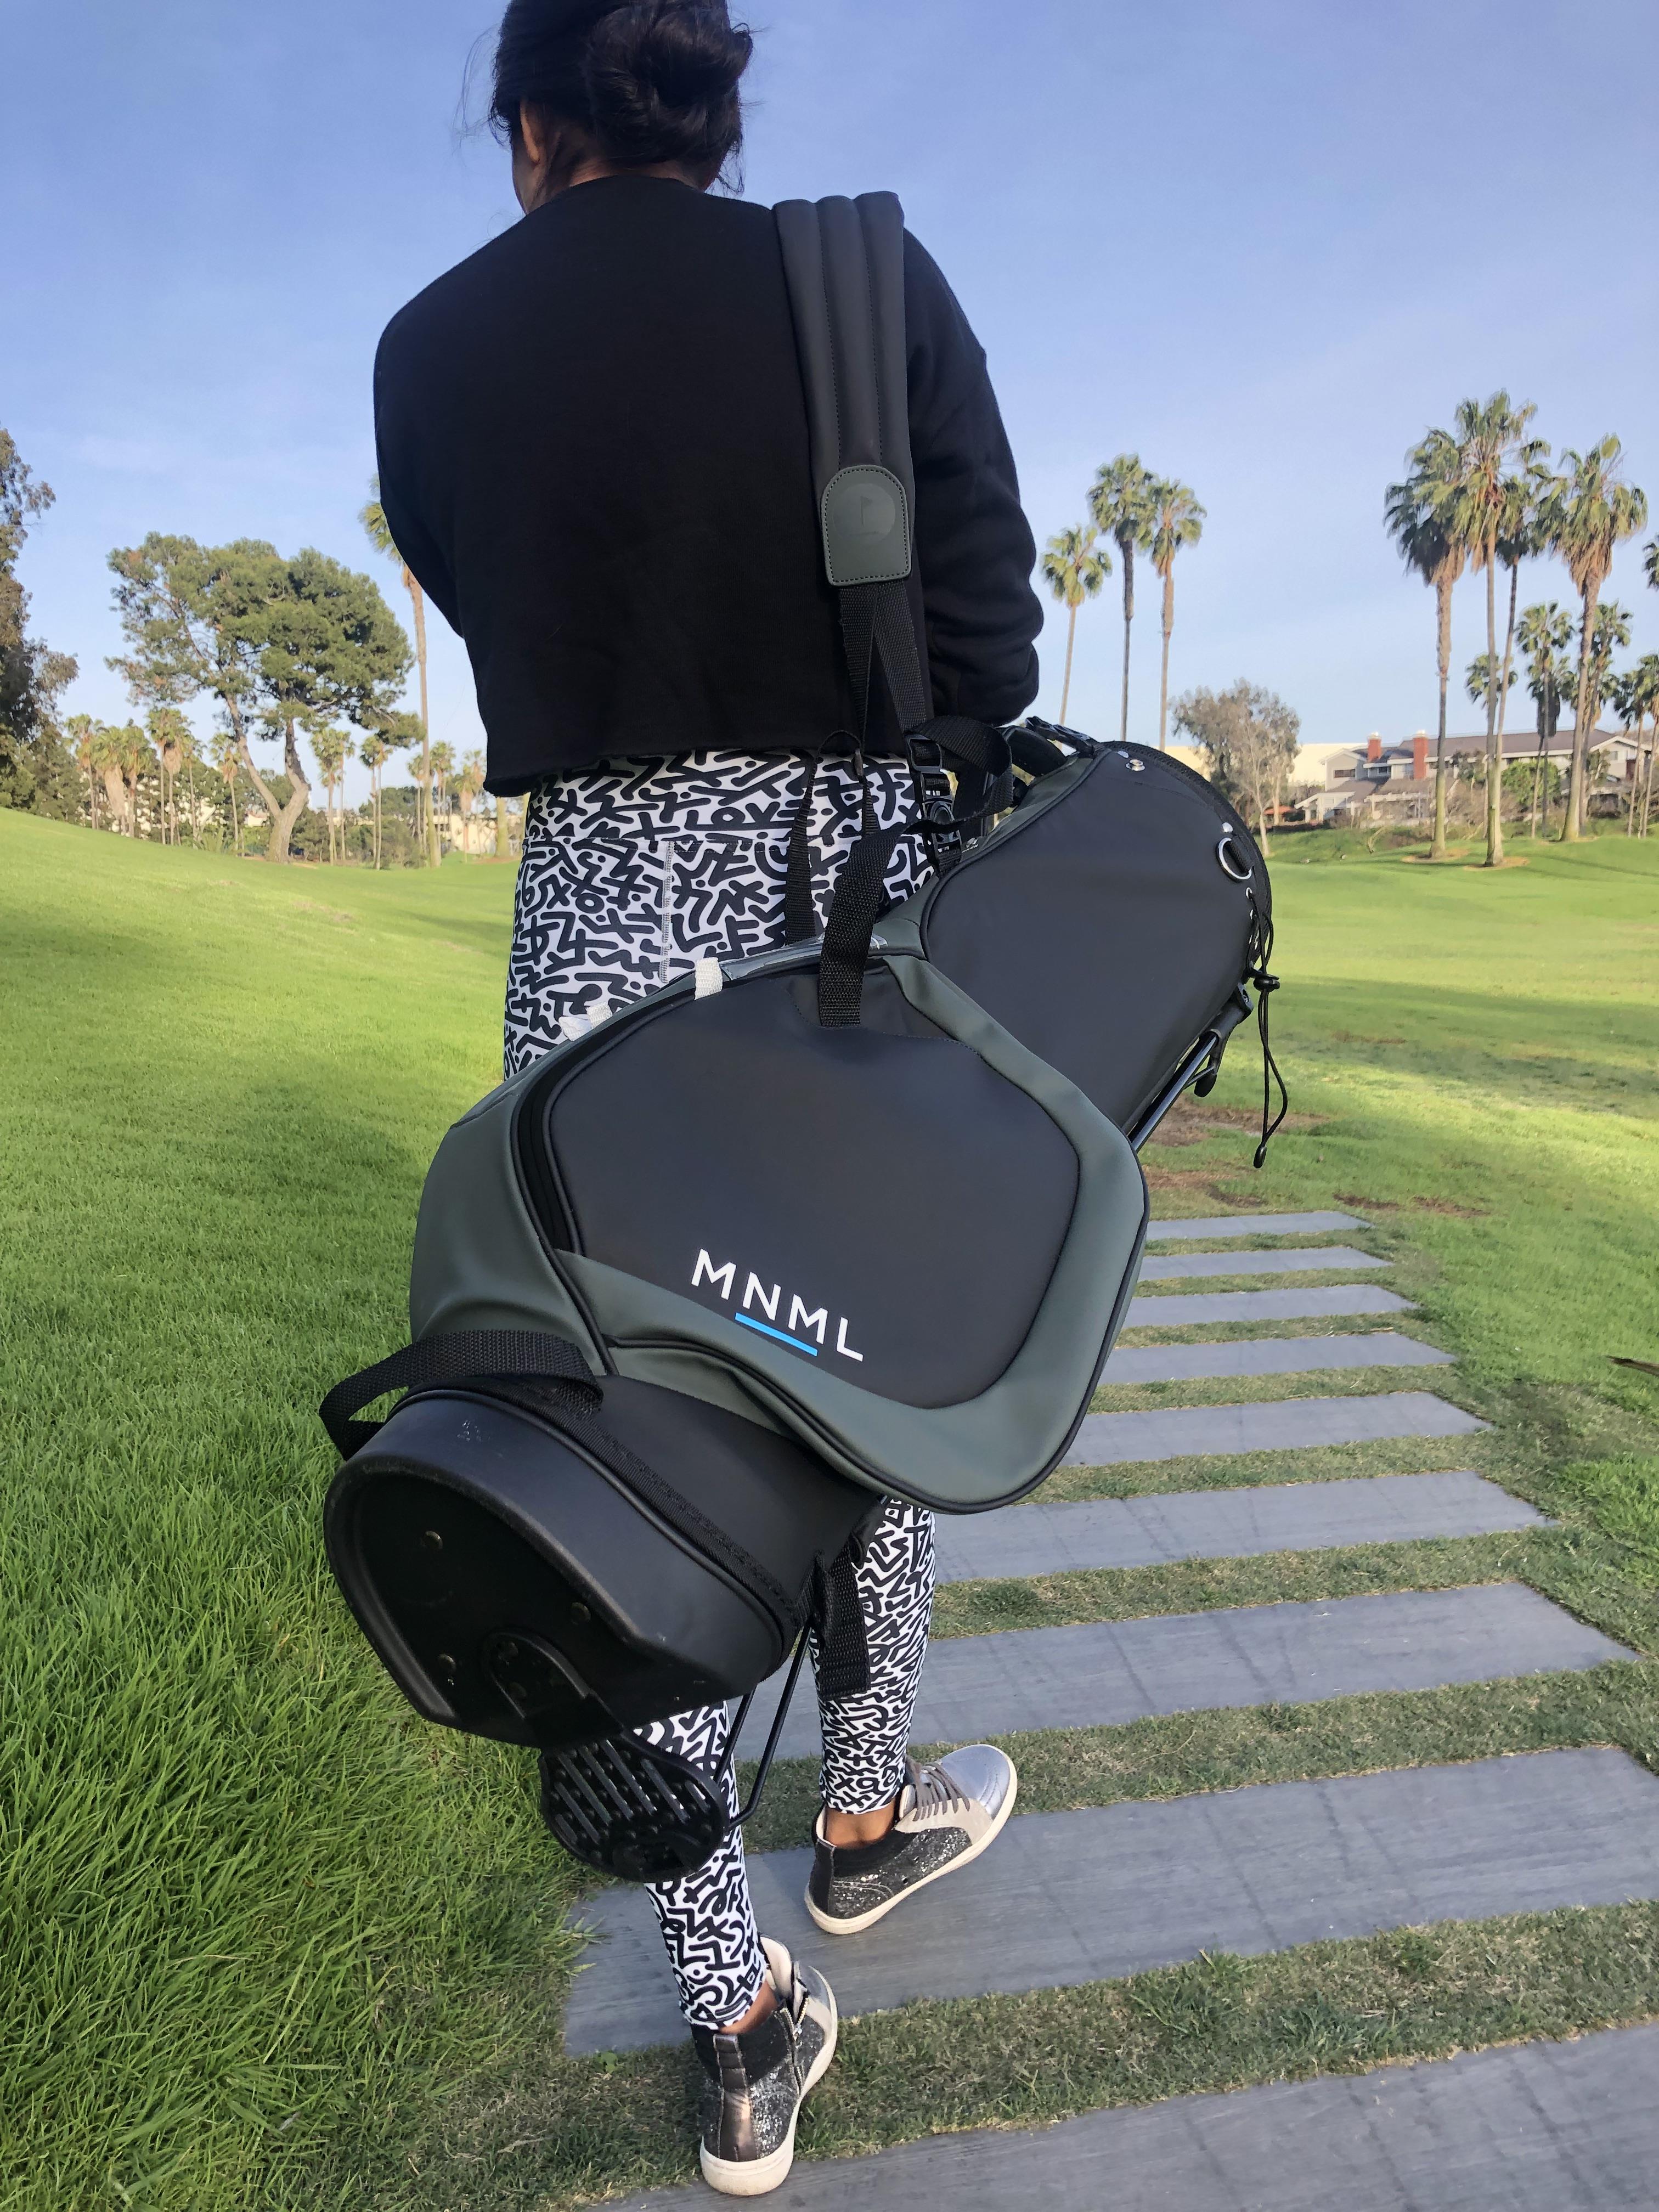 SUPERSTROKE'S PREMIUM-QUALITY PANTHEON GOLF BAGS DEBUT WITH STAND, HYB